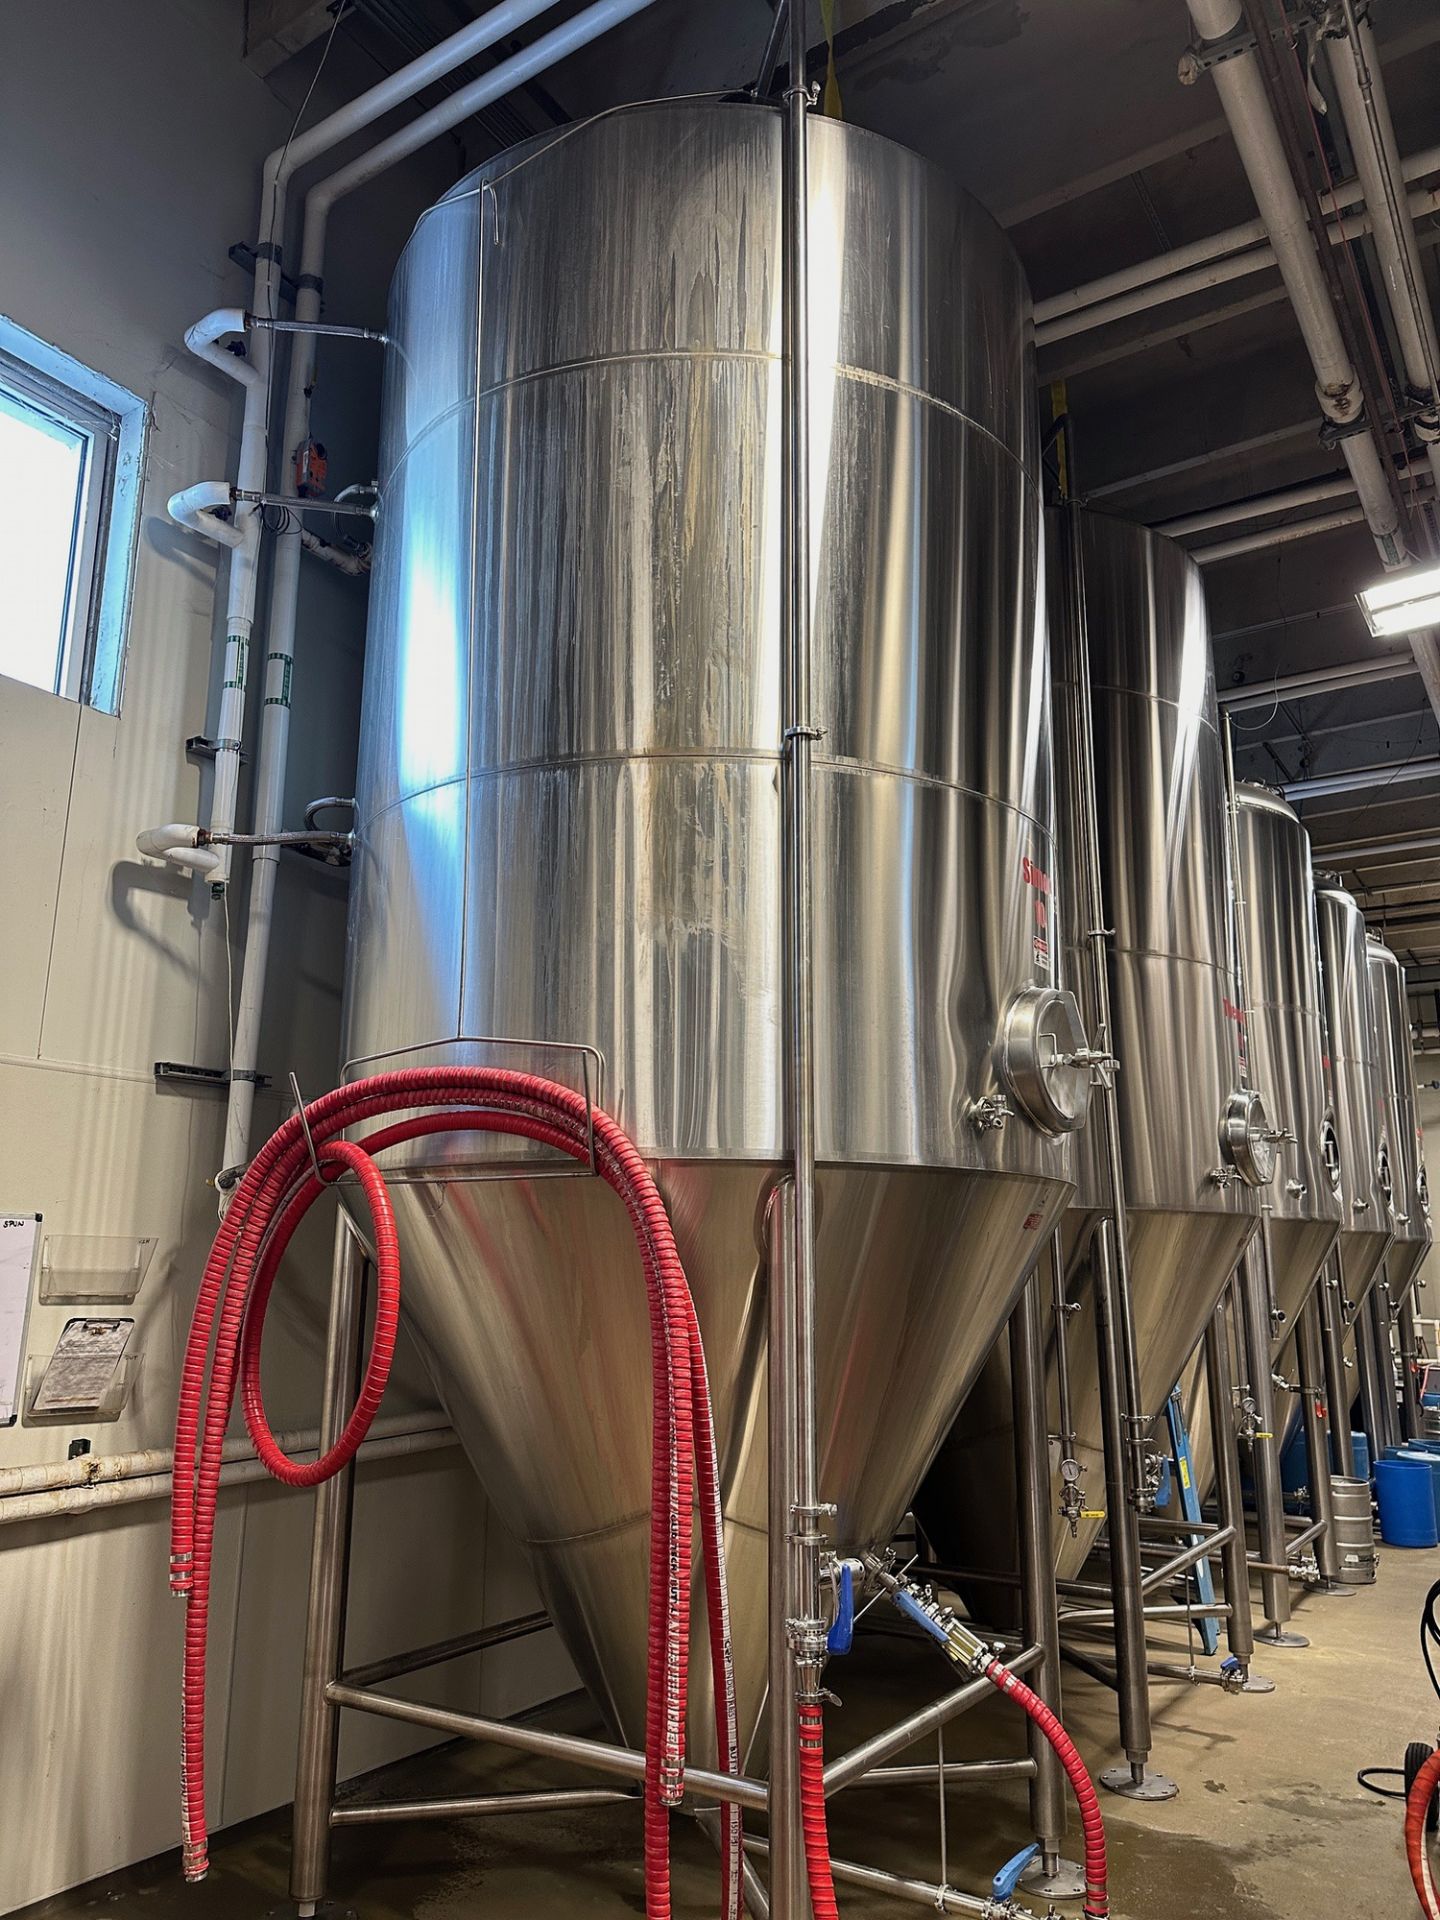 Silver State Stainless 120 BBL Stainless Steel Fermentation Tank - Cone Bottom, Gly | Rig Fee $2150 - Image 2 of 4